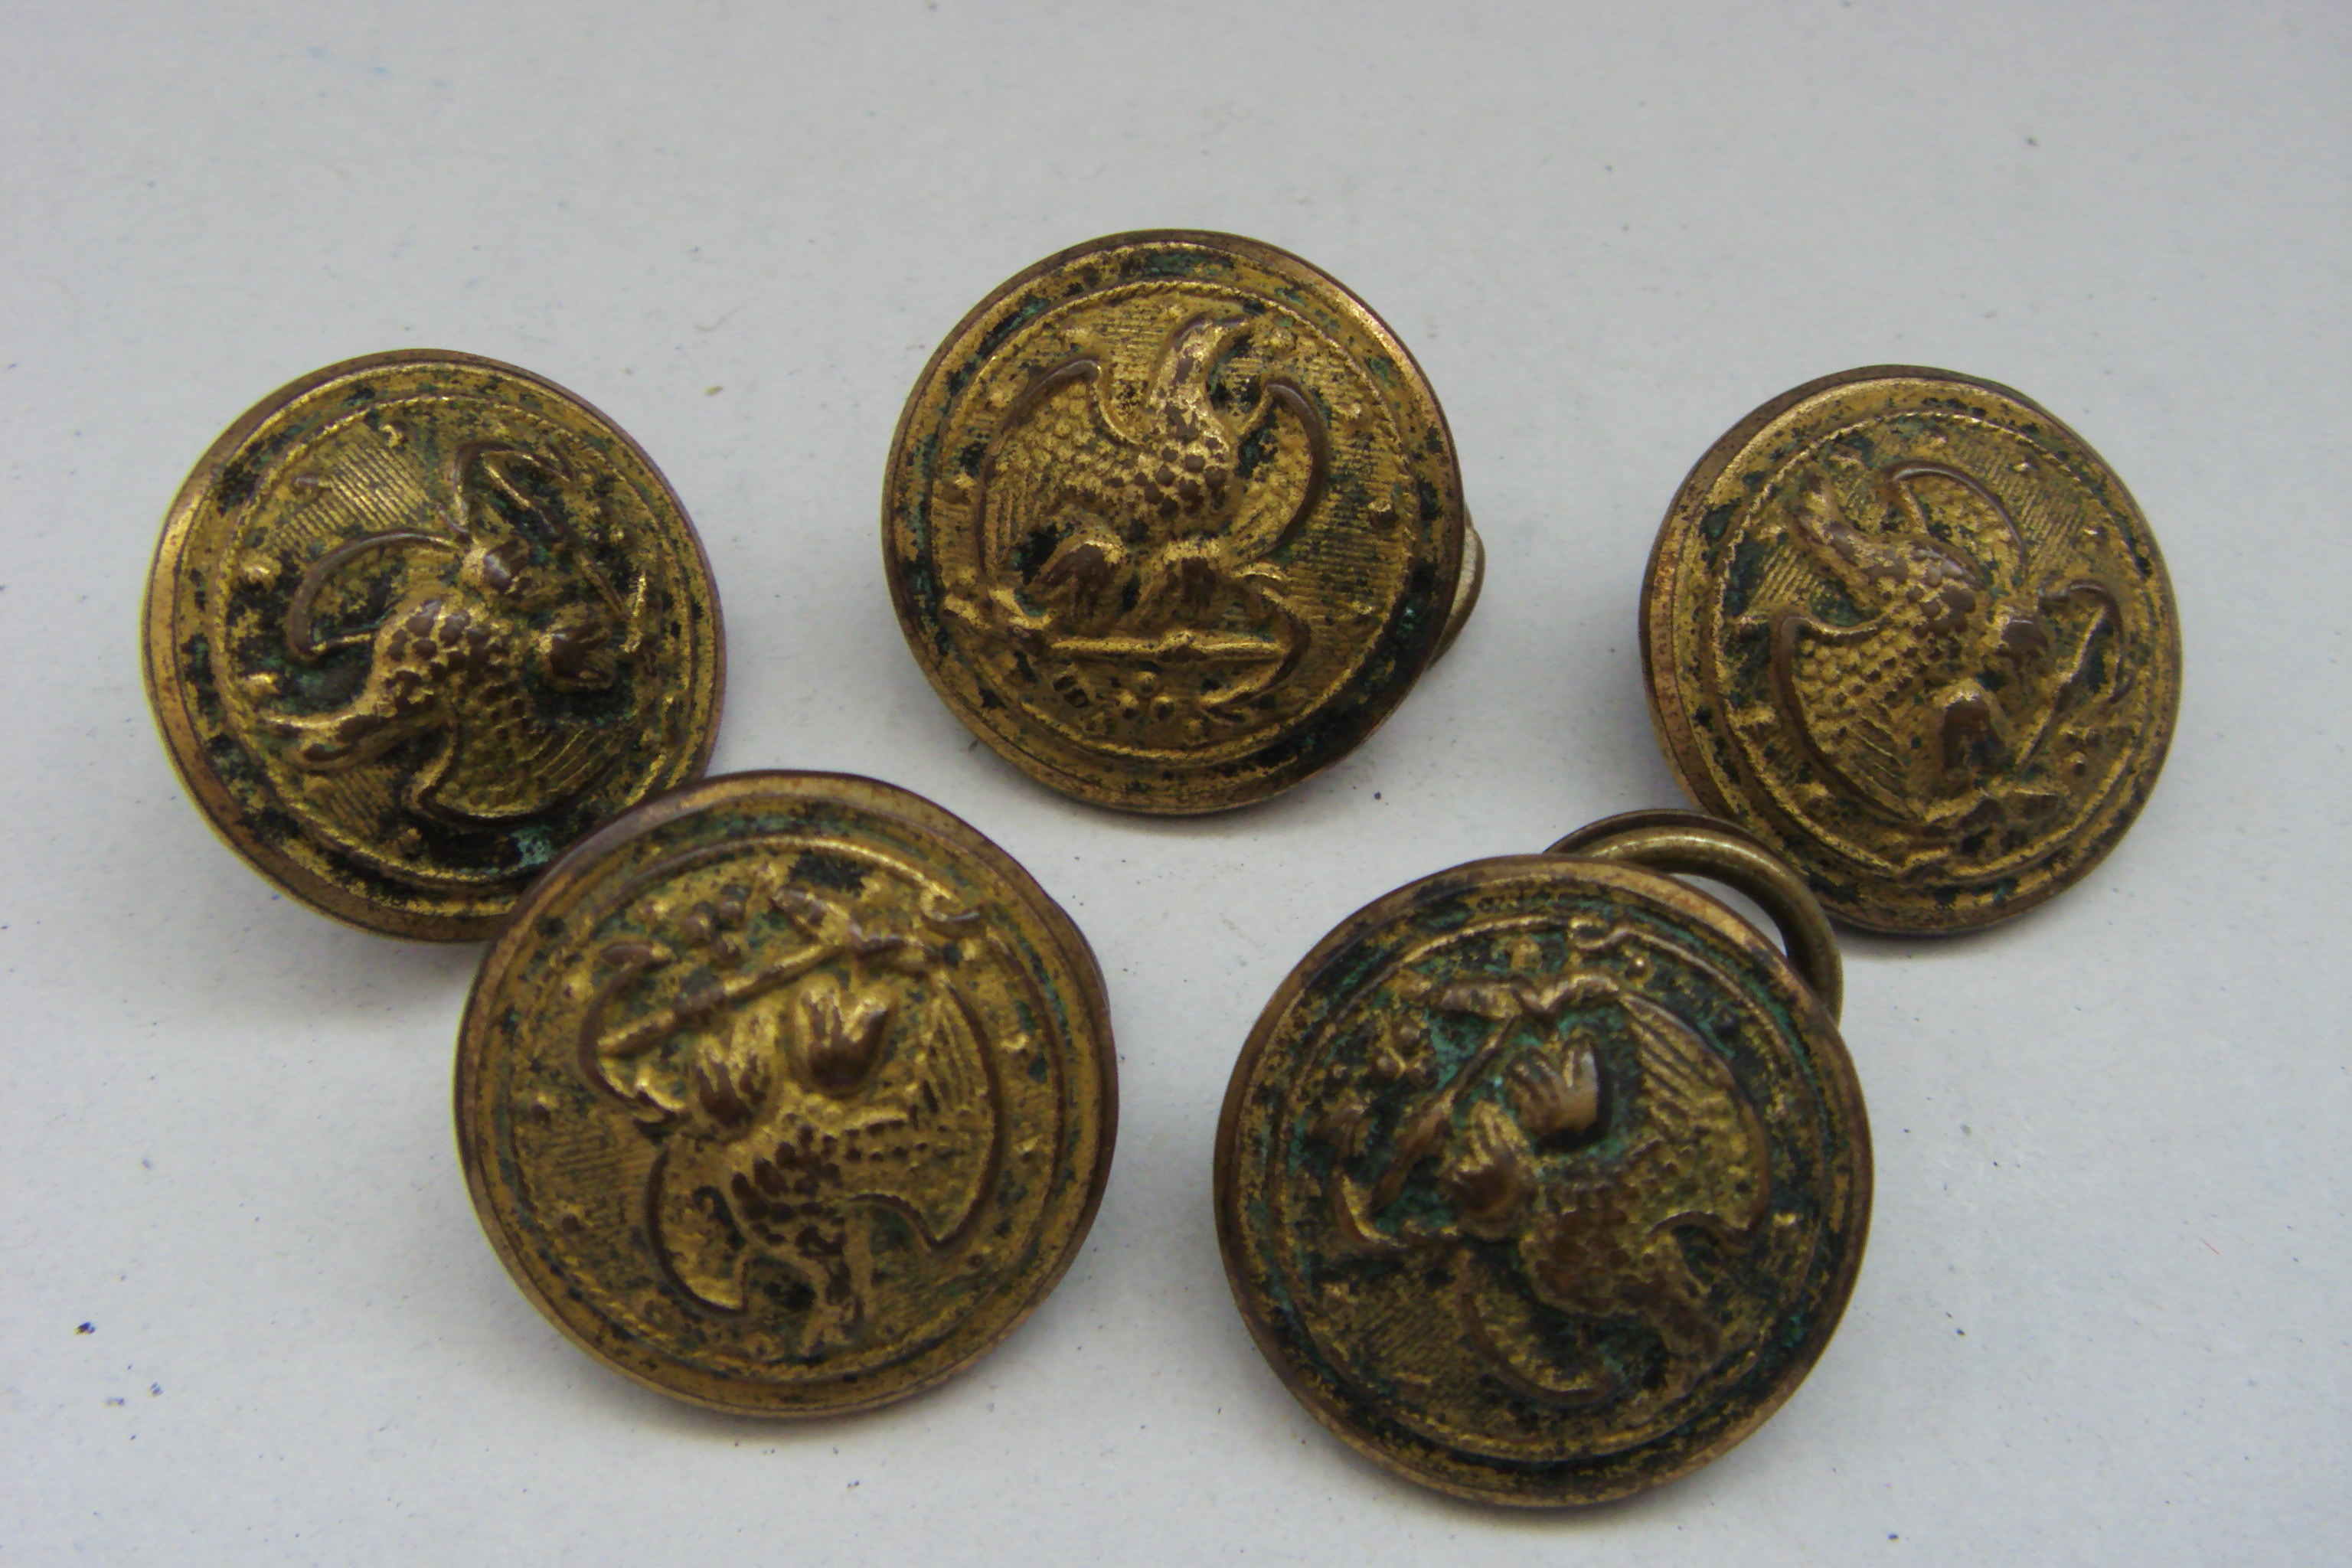 EARLY SET OF UNIFORM BUTTONS FROM THE UNITED STATES NAVY